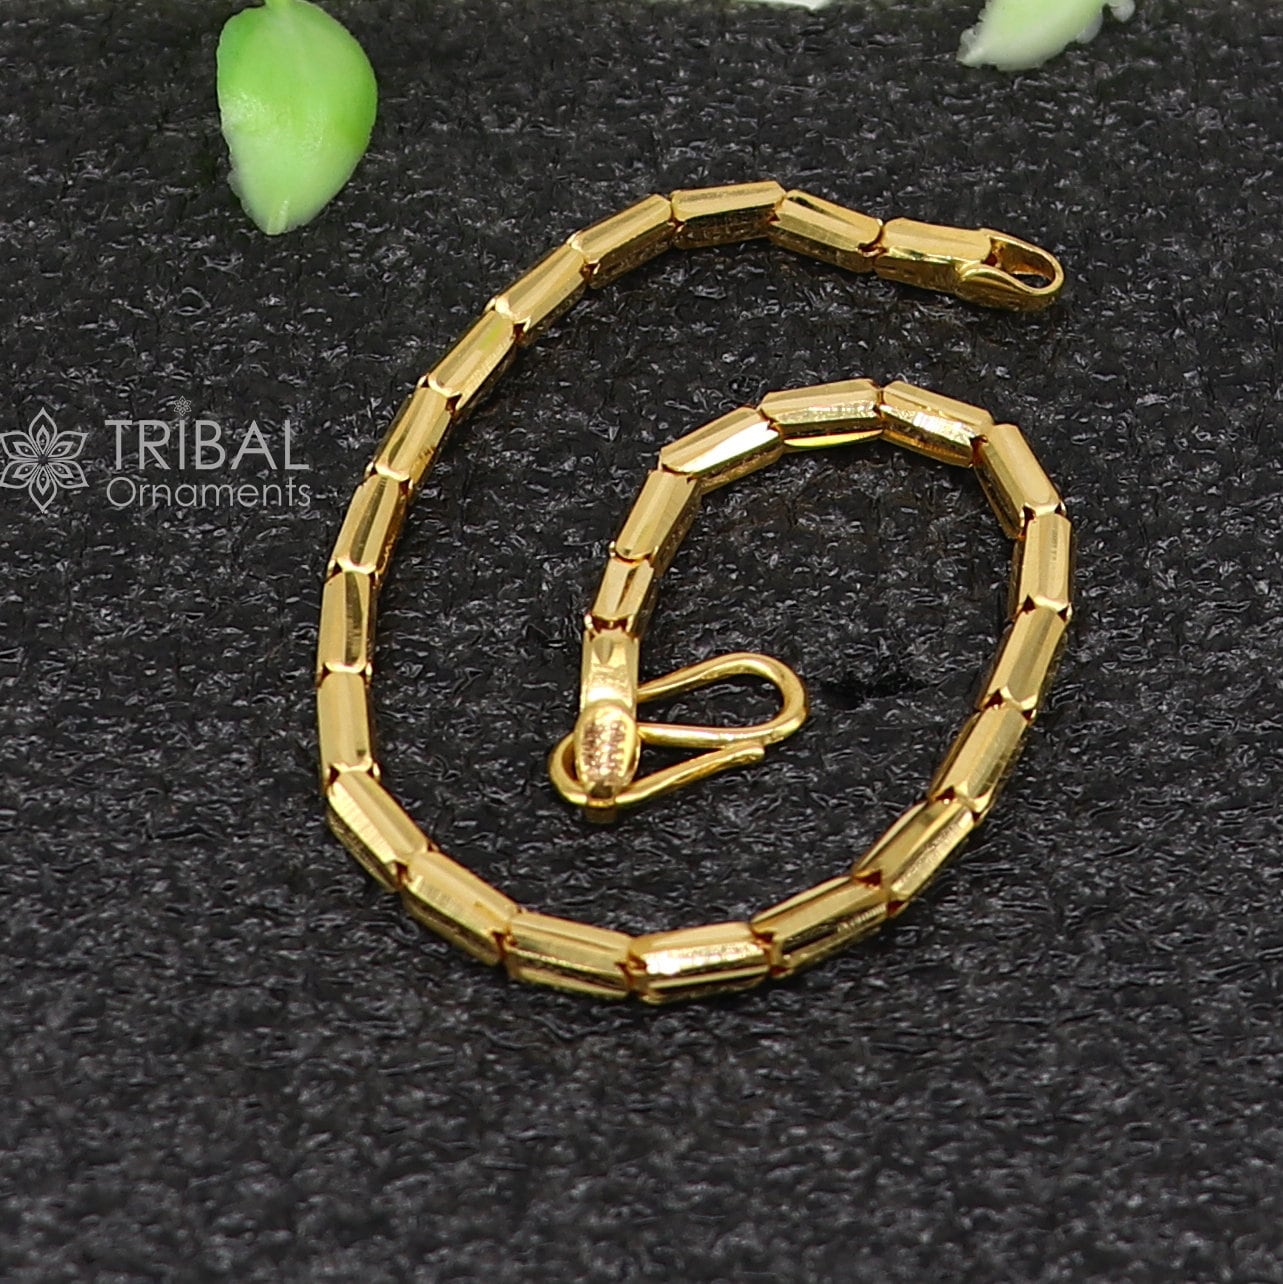 Exclusive trendy design handmade 22kt yellow gold All size Baht chain bracelet best men's wedding gifting jewelry from india gbr76 - TRIBAL ORNAMENTS